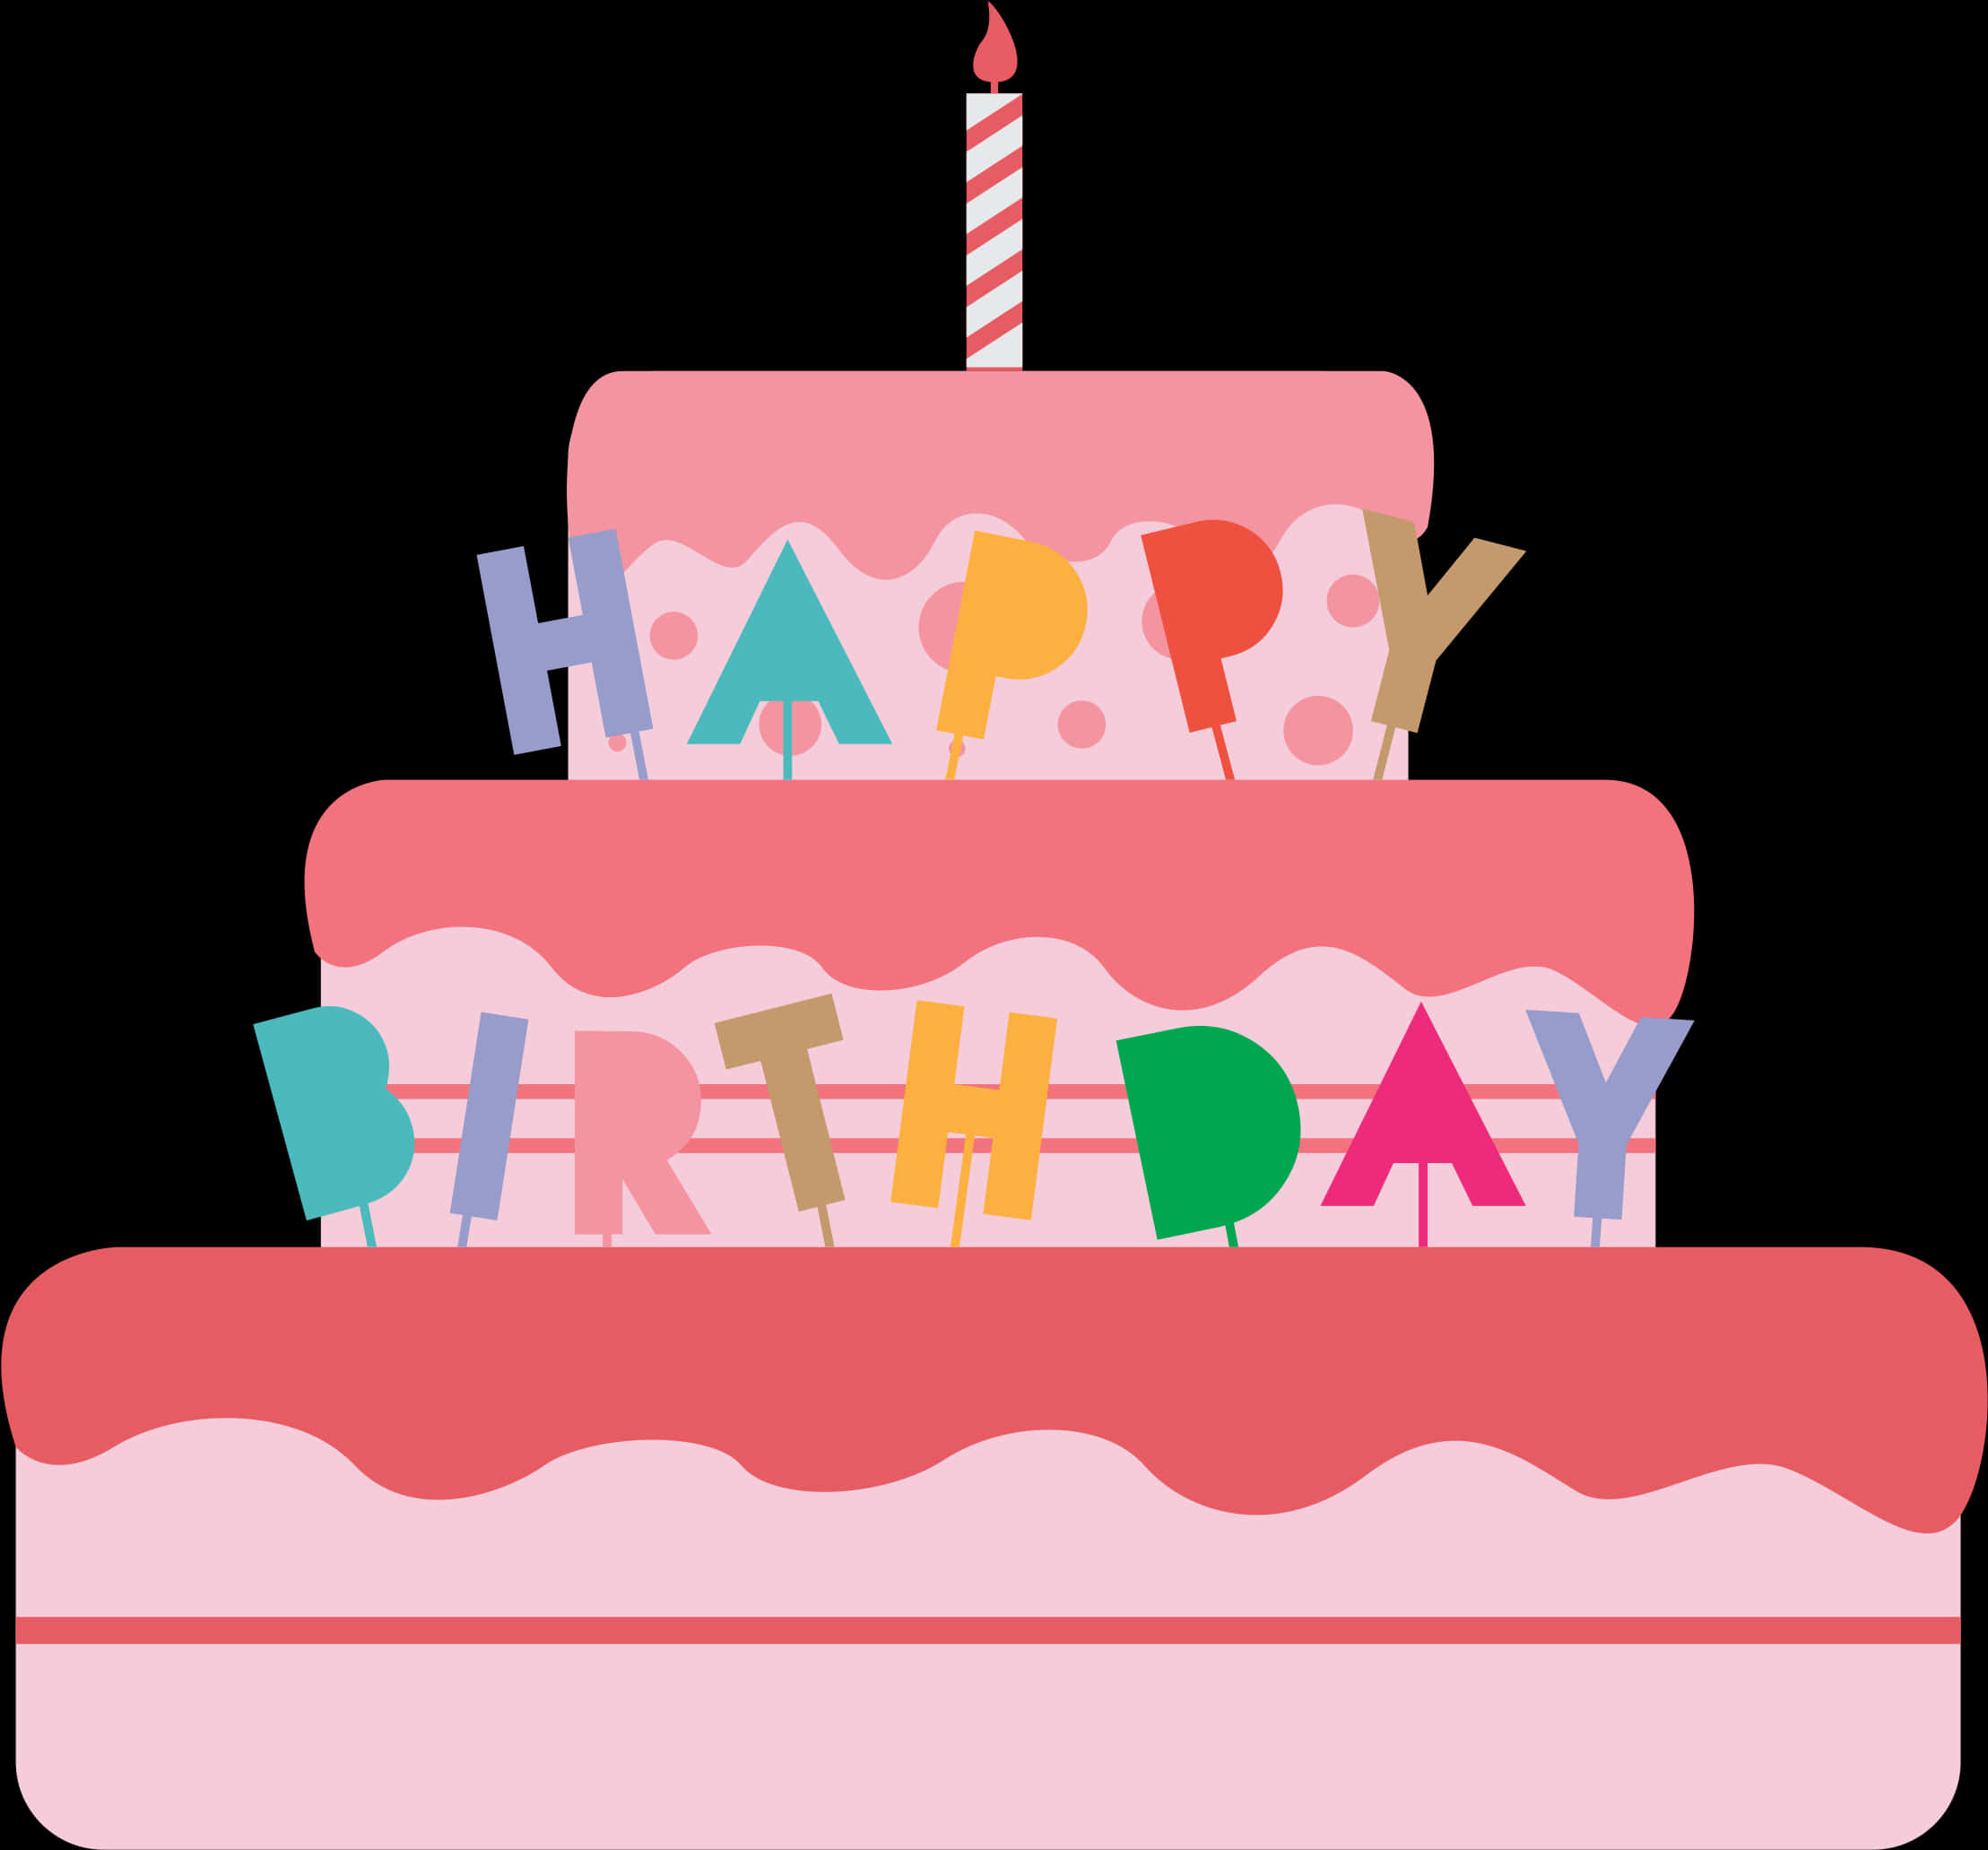 Colorful Happy Birthday Cake Illustration PNG